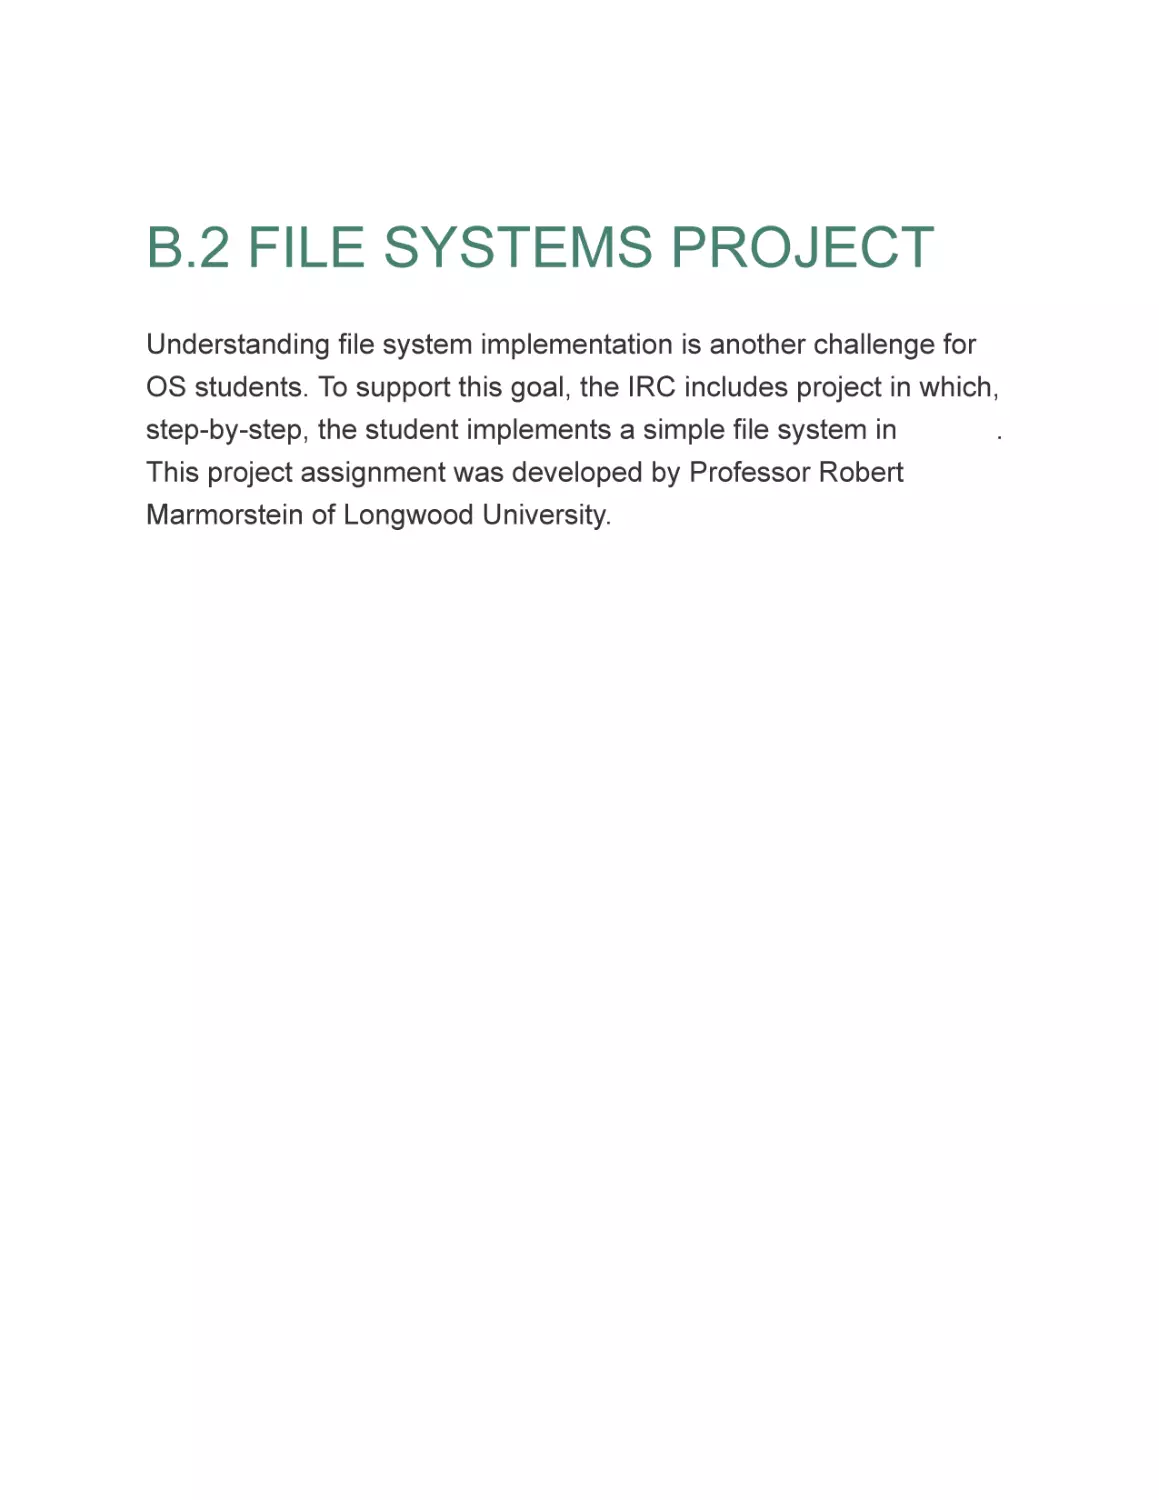 B.2 FILE SYSTEMS PROJECT